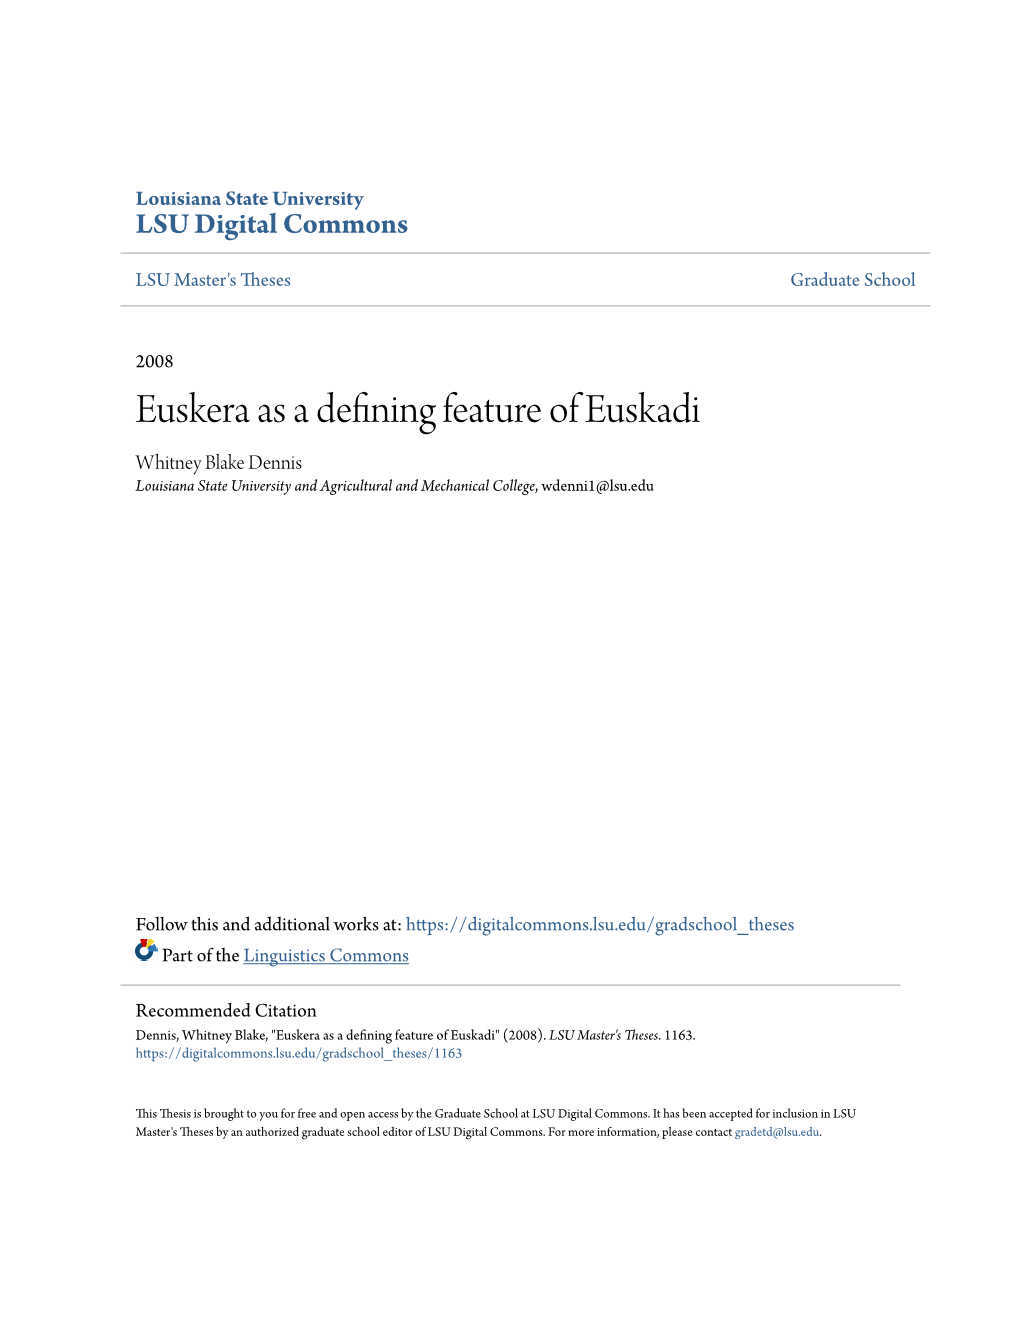 Euskera As a Defining Feature of Euskadi Whitney Blake Dennis Louisiana State University and Agricultural and Mechanical College, Wdenni1@Lsu.Edu